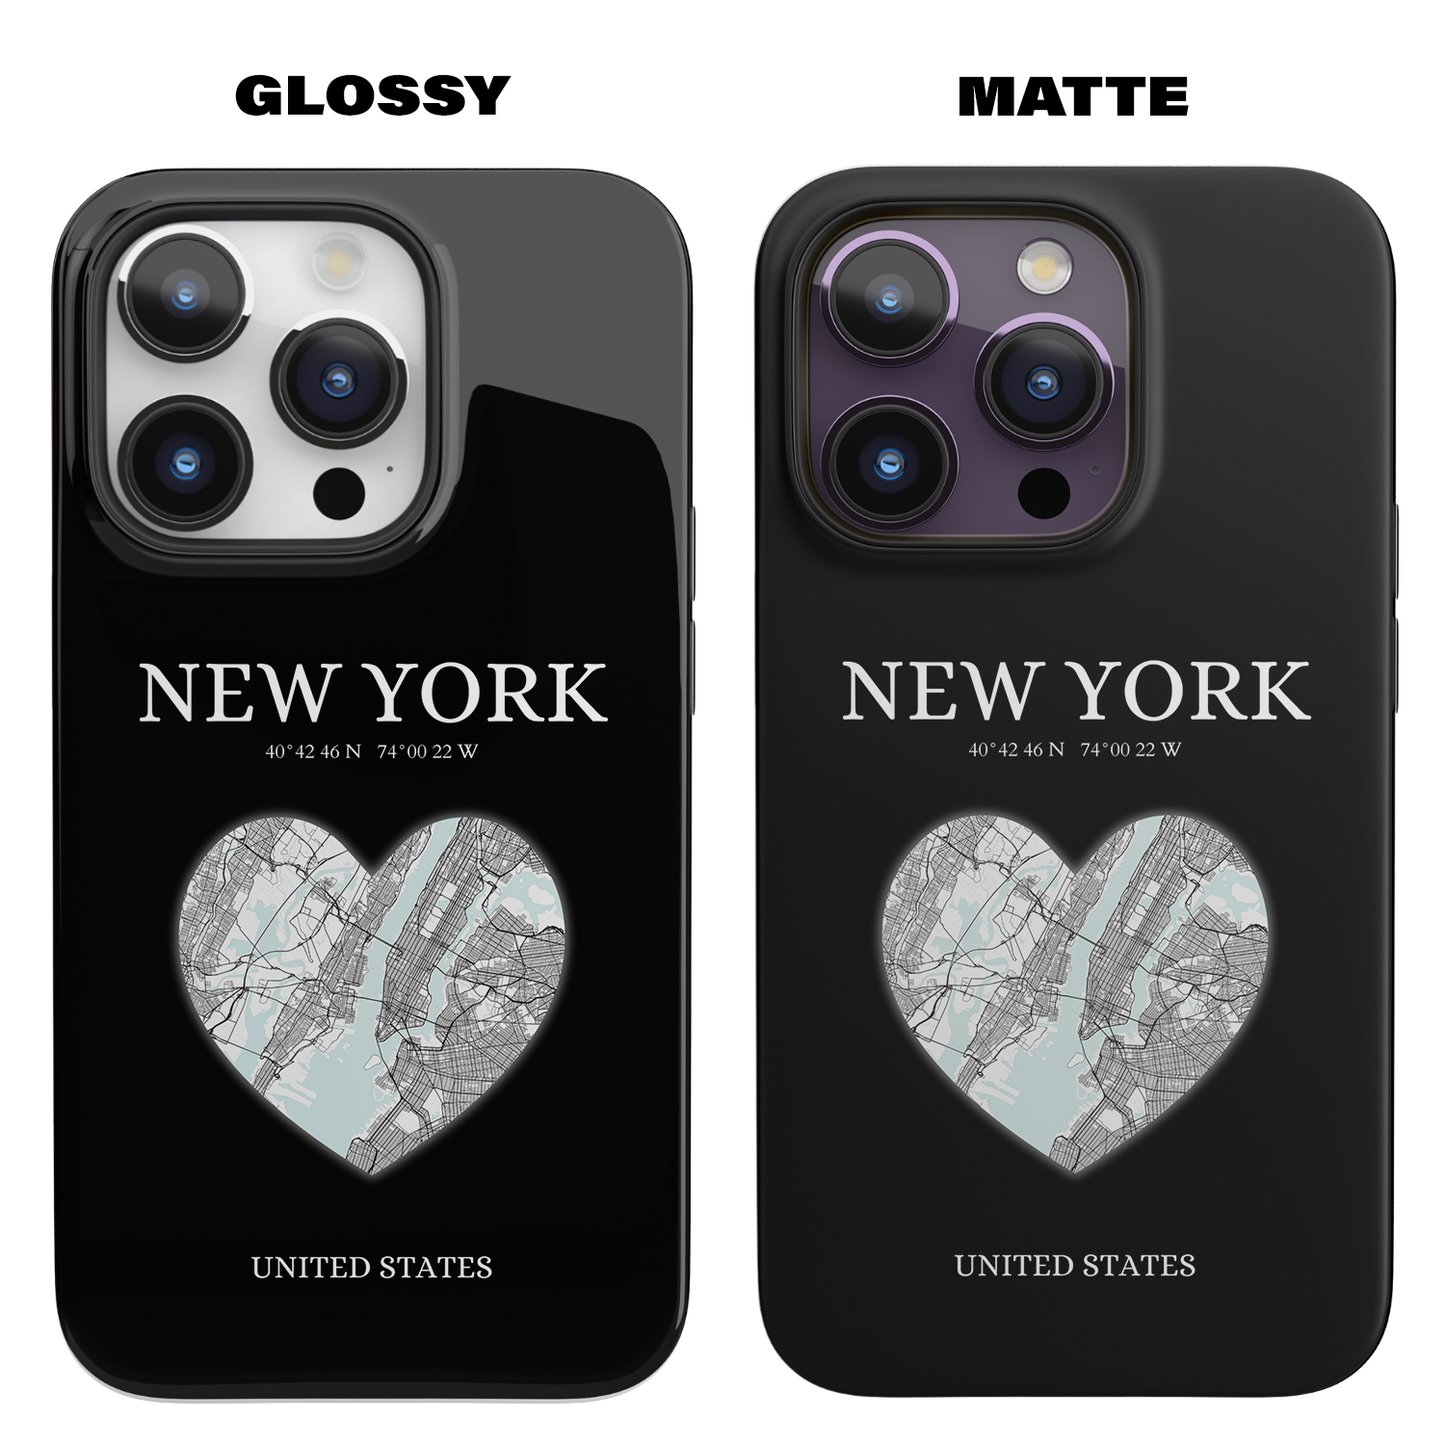 Elevate your iPhone's style with the New York Heartbeat Black MagSafe Case, offering robust protection, MagSafe compatibility, and a choice of matte or glossy finish-York Heartbeat - Black (iPhone MagSafe Case)